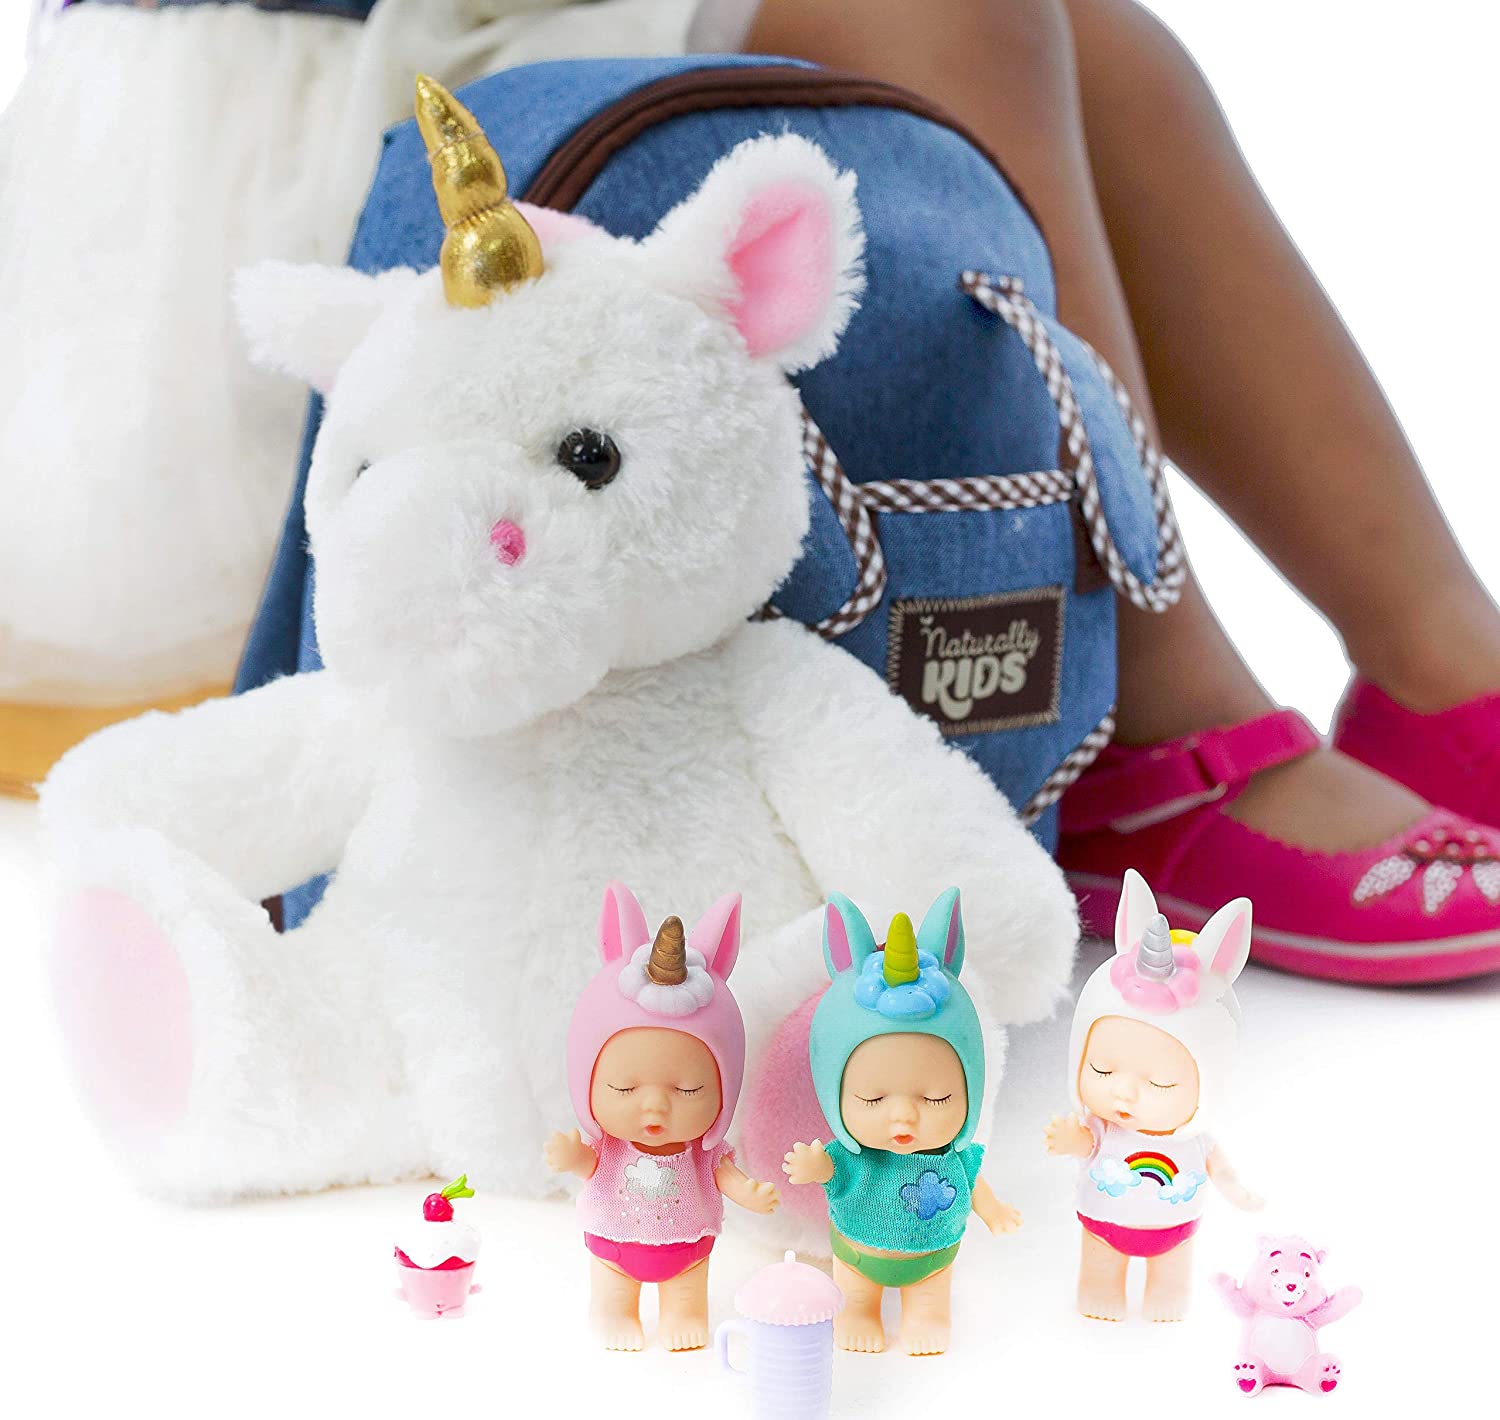 Naturally KIDS Small Unicorn Backpack for Girls Unicorn Toys for Girls - Unicorns  Gifts for Girls Age 5- Unicorn Stuffed Animal for Girls - Unicorn Plush Toys  for 3 4 6 7